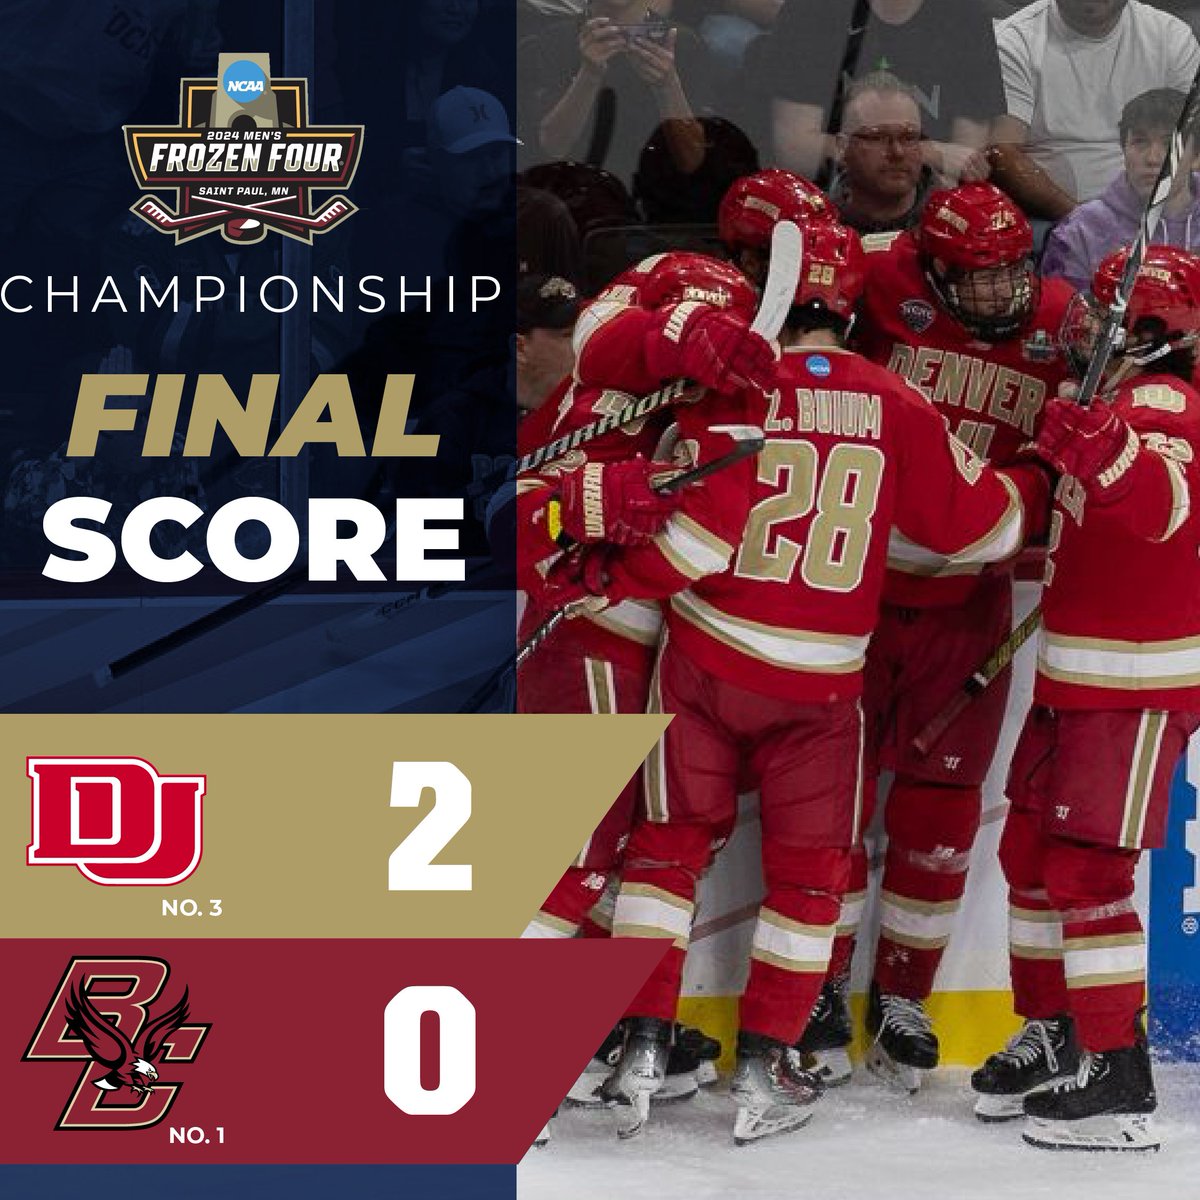 Completed the Beantown sweep for @DU_Hockey's 2nd Natty in 3 years! 🏆 #NCHChockey // #GoPios